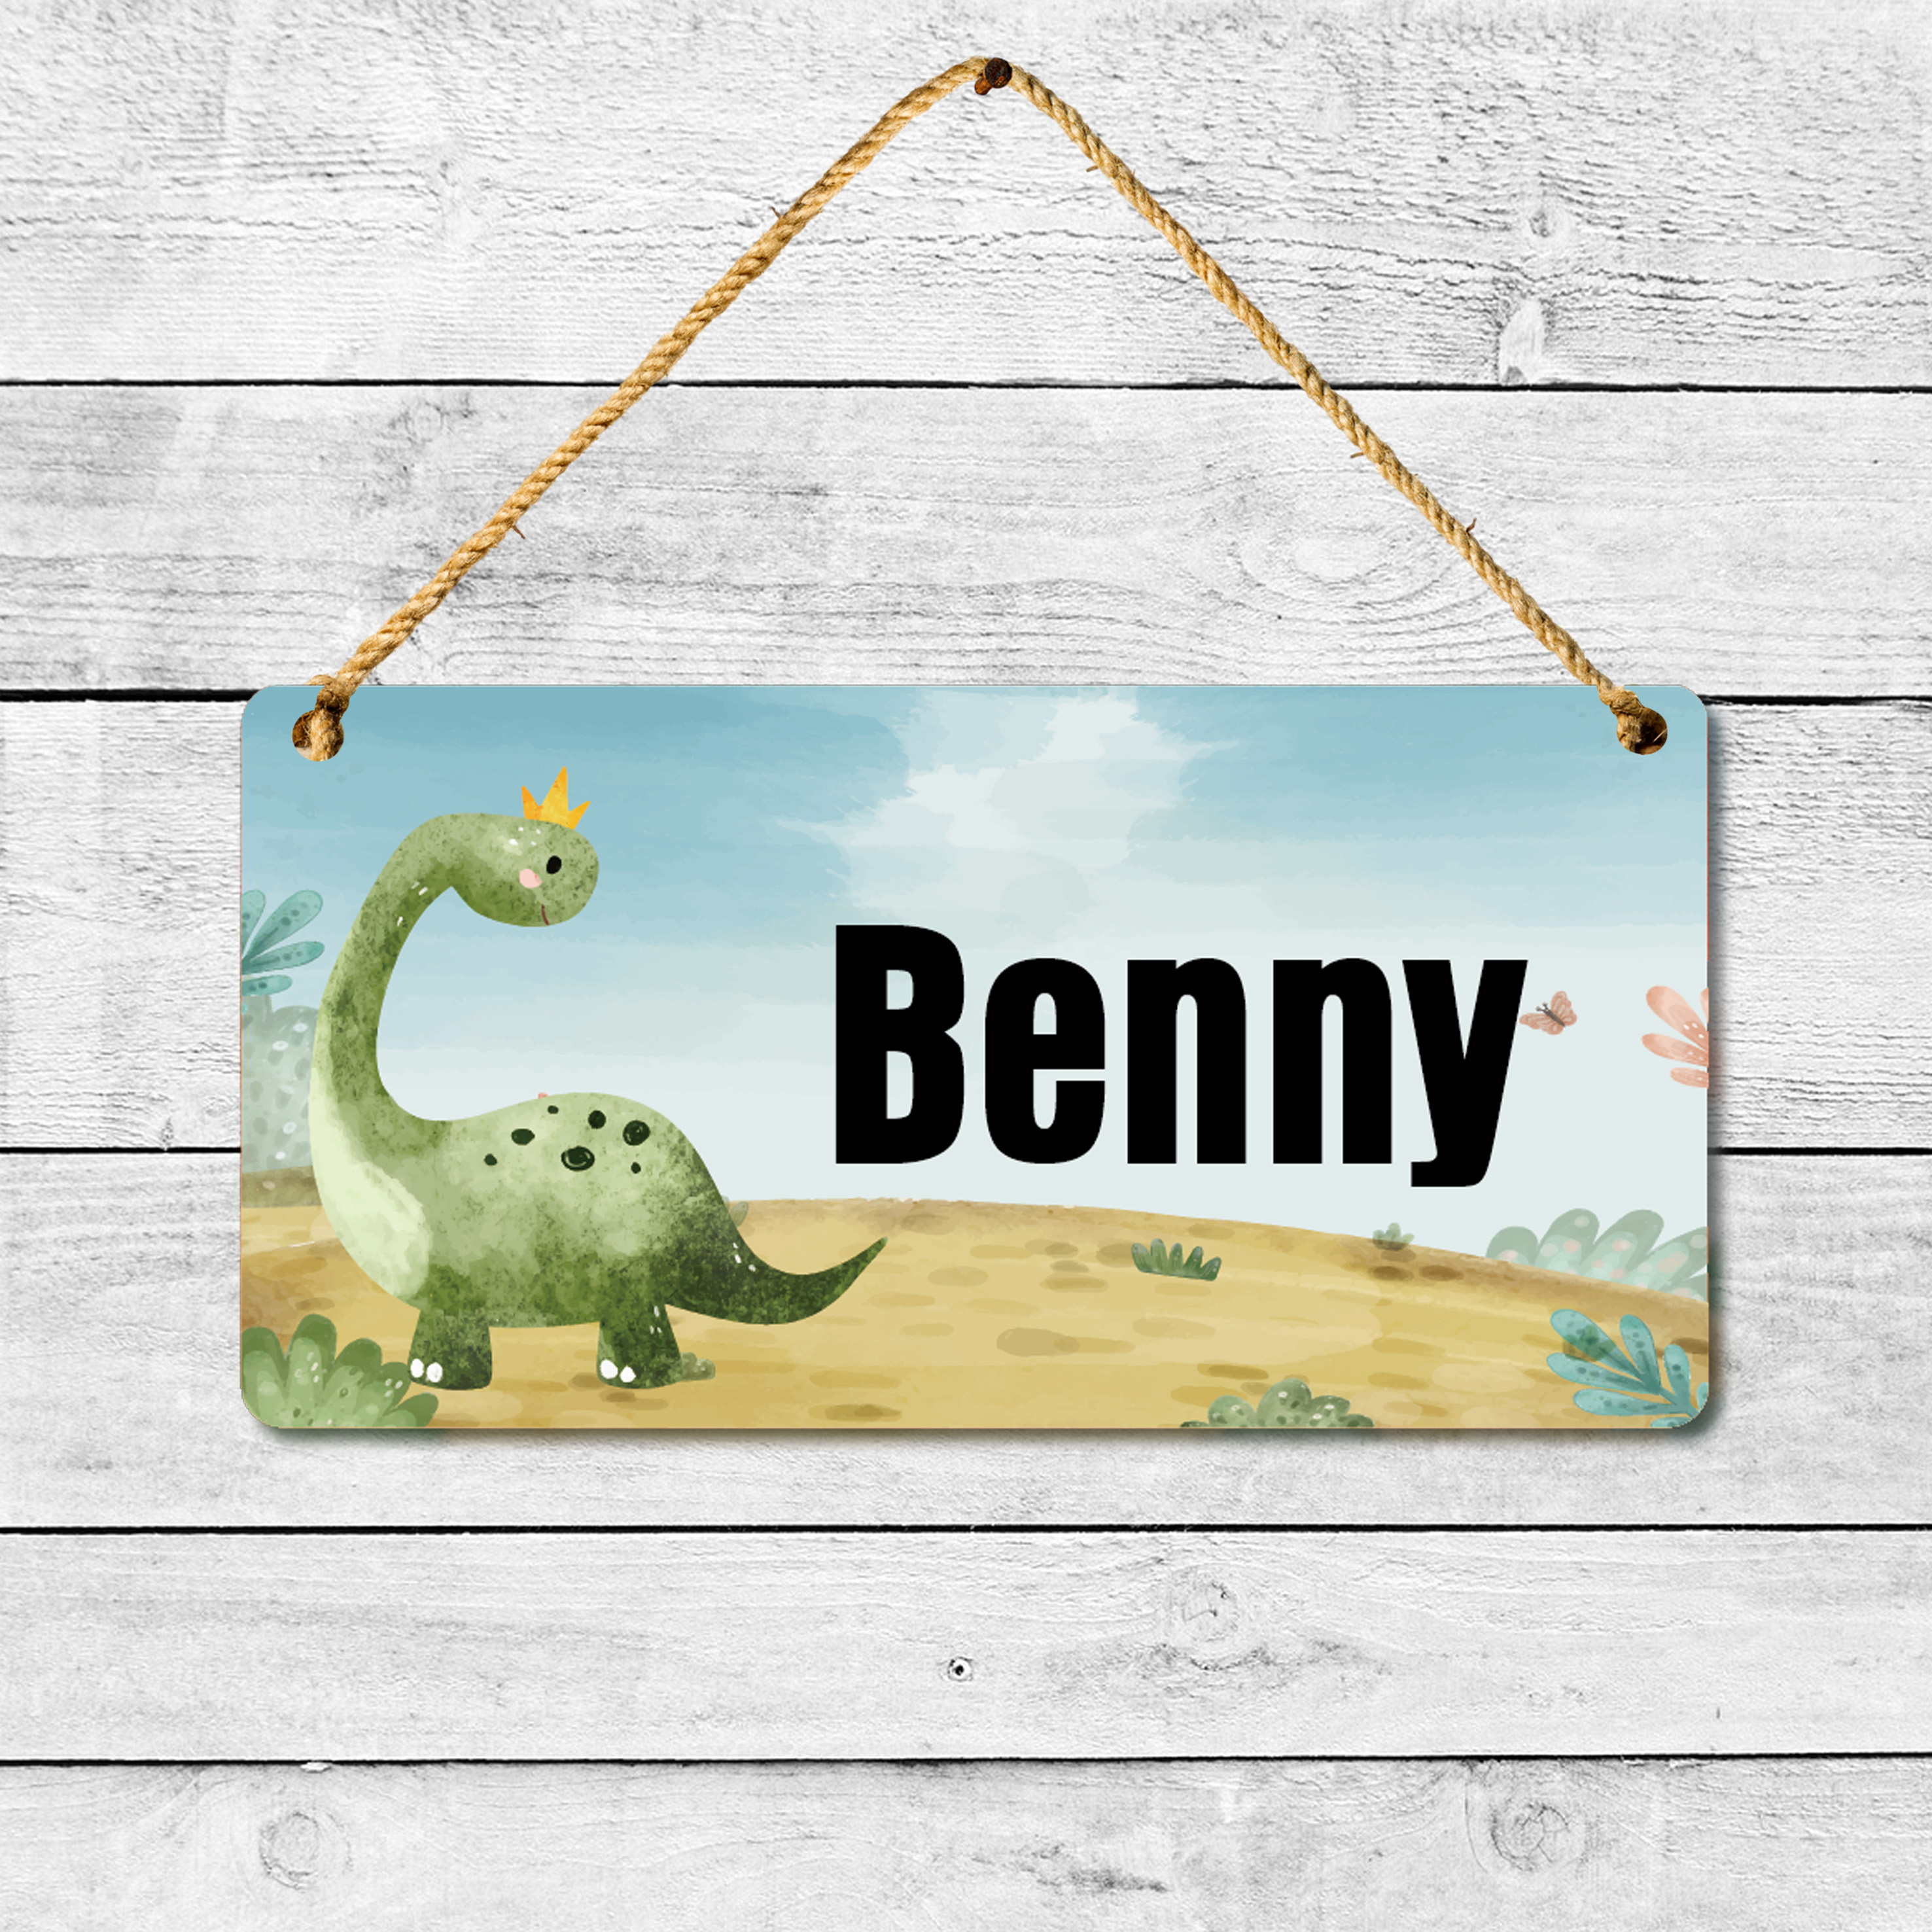 

1pc Customized Name Personalized License Plate, Cartoon Dinosaur Pattern, Cartoon Family Wall Pendant Family Life Accessories Bedroom Living Room Common, For Home Room Living Room Office Decor